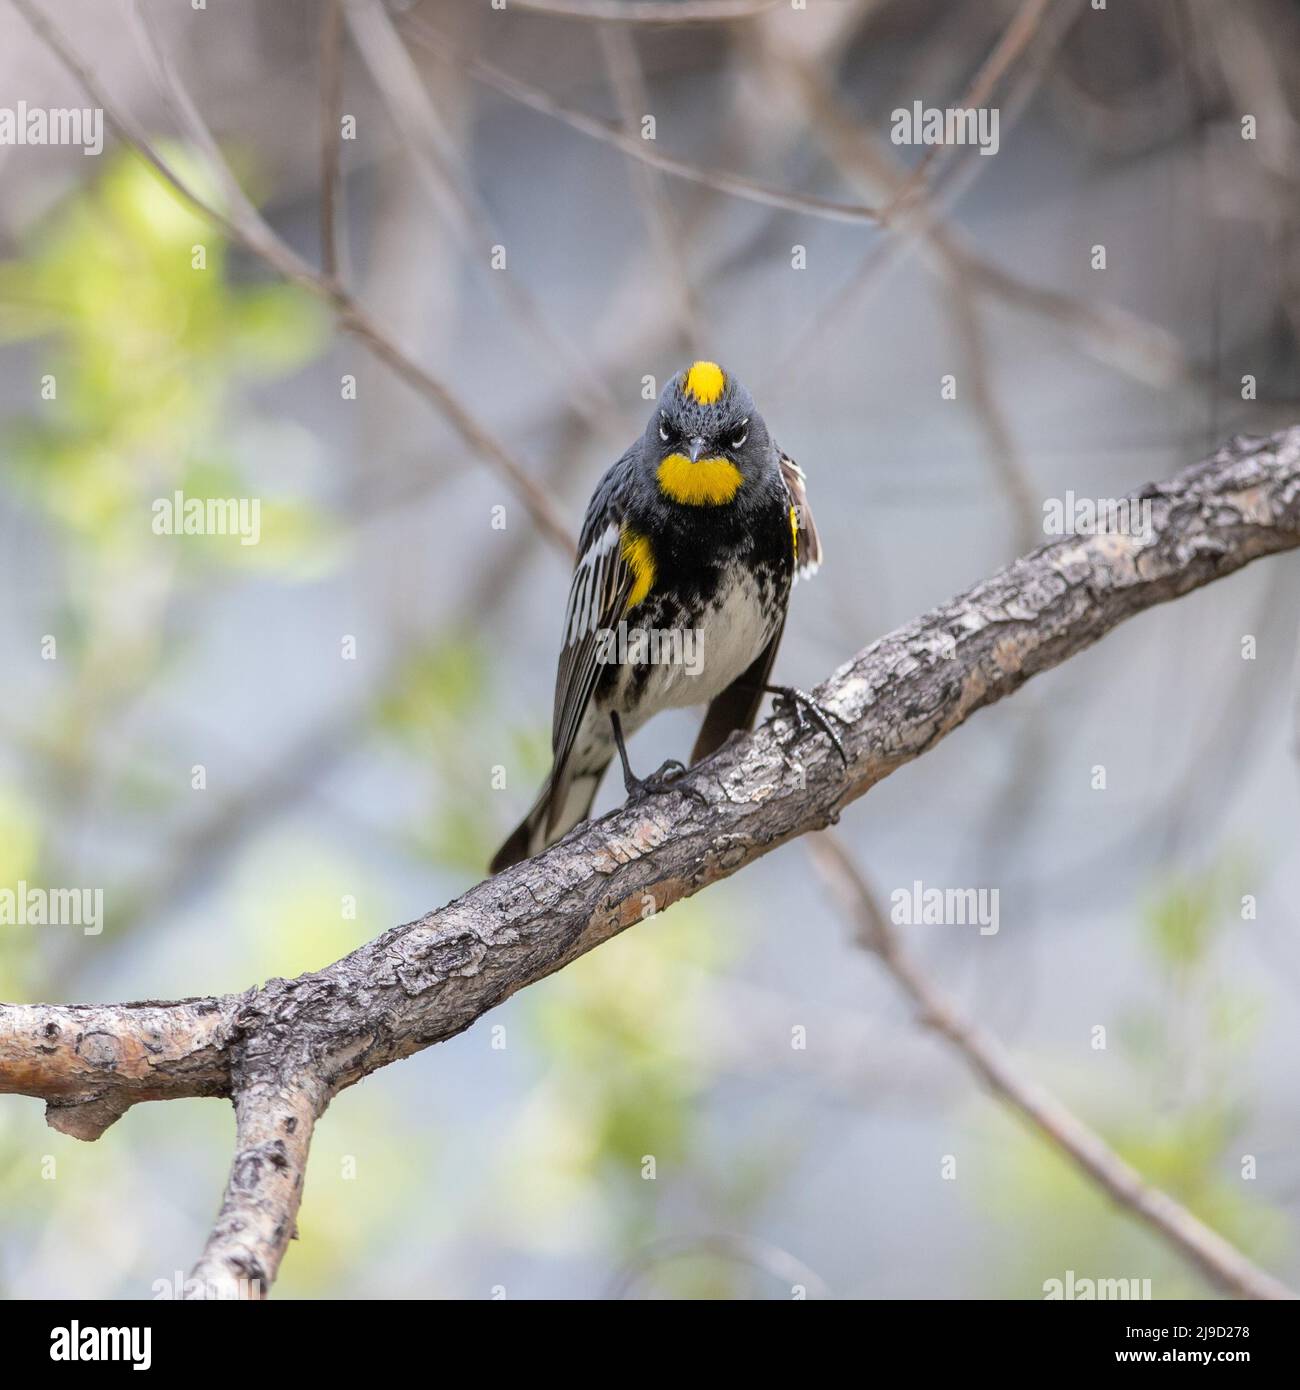 A Yellow-rumped Warbler (Audubon's), tips his head revealing the bright yellow feather cap that goes with its colorful yellow throat patch. Stock Photo